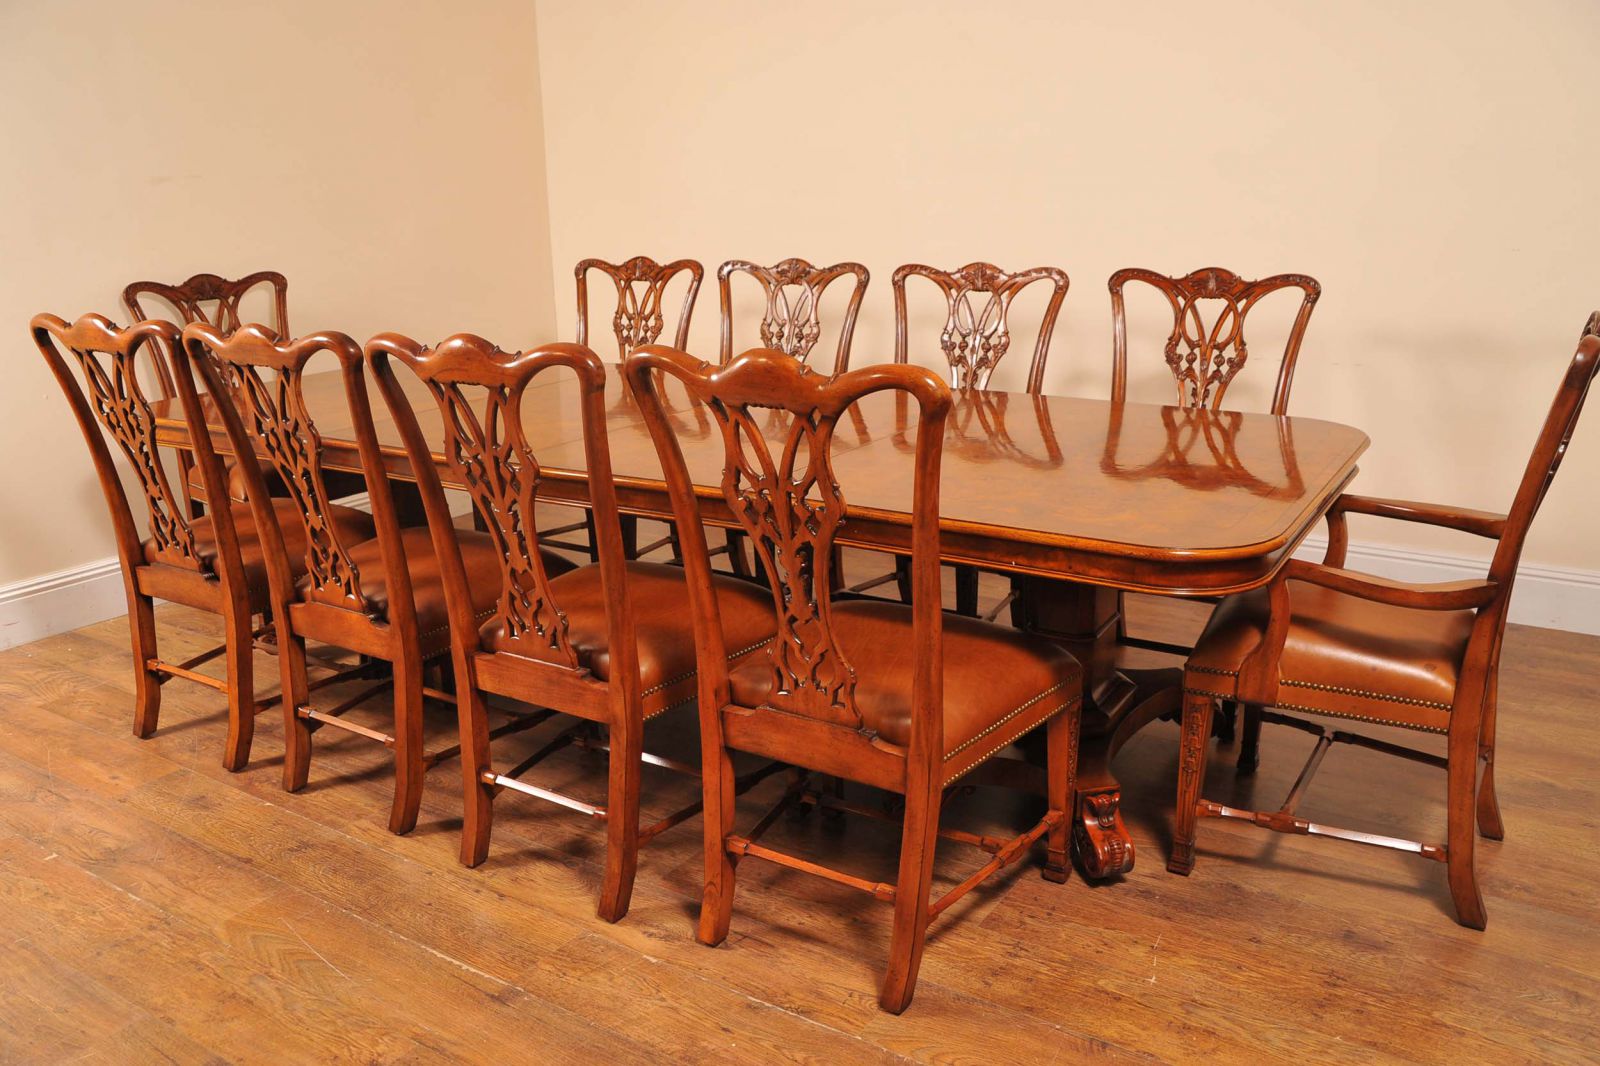 Lovely set in walnut with matching Chippendale chairs